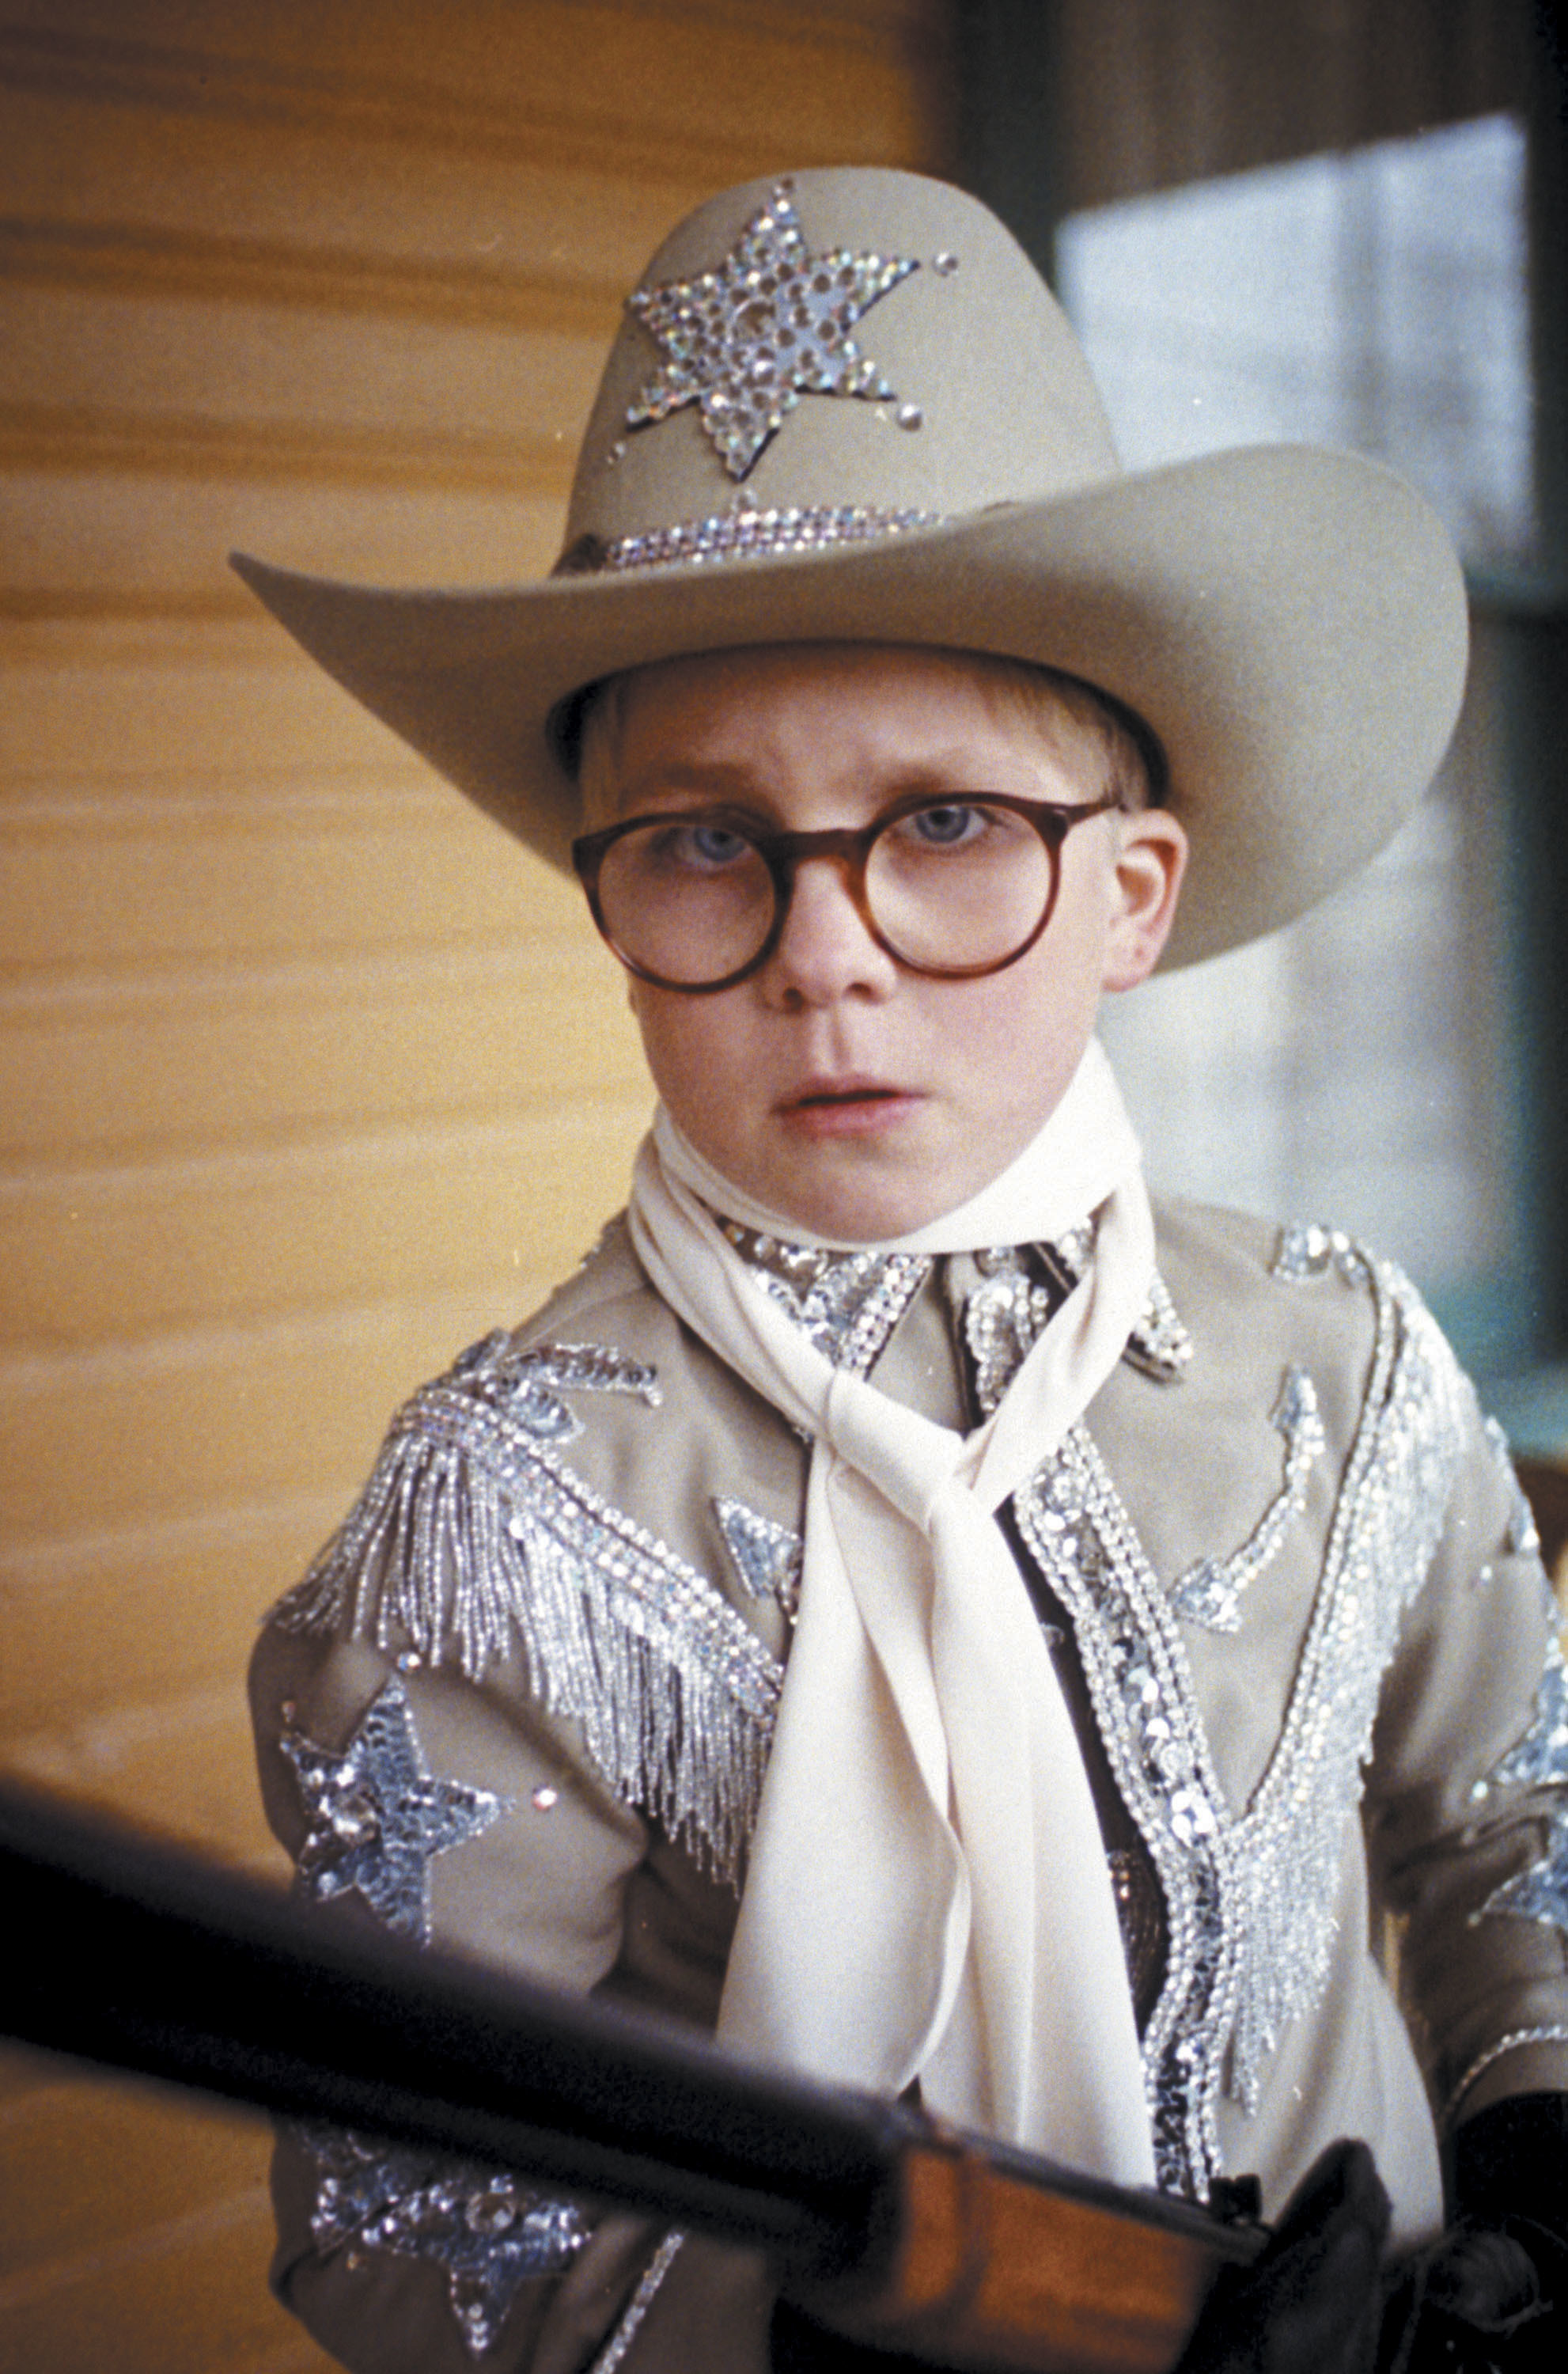 <p>Every kid wanted a Red Ryder BB gun for Christmas after Peter Billingsley starred in "A Christmas Story" in 1983. The child actor also performed in more than 120 commercials before he was cast as Ralphie.</p>